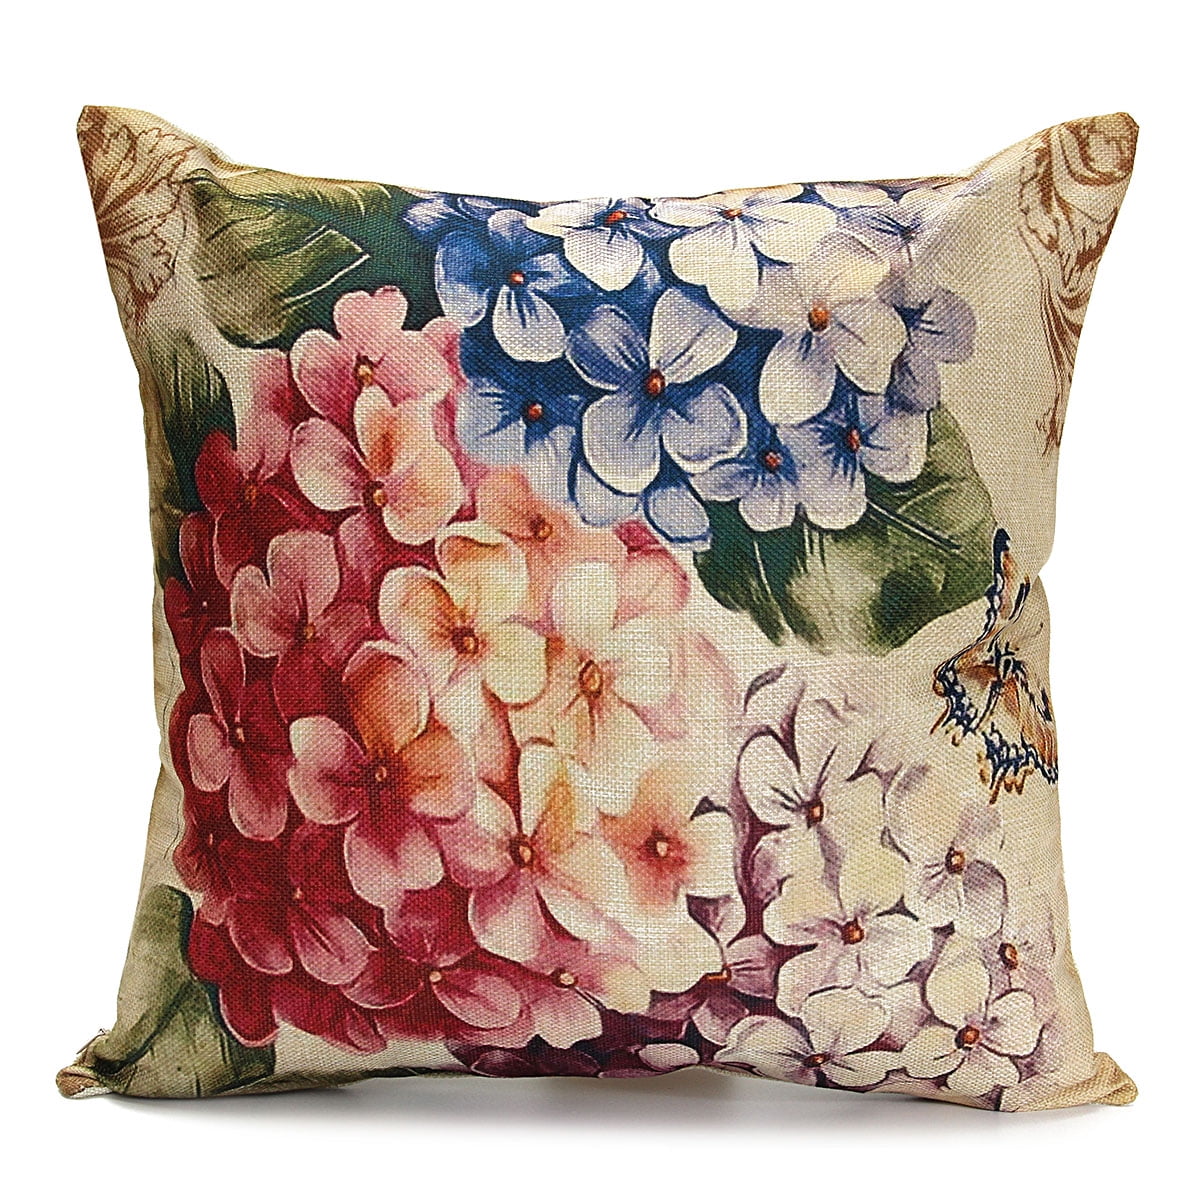 64 Color Floral Leaf Cushion Garden Pillow Case Cover Home Decoration 18 x 18 in 